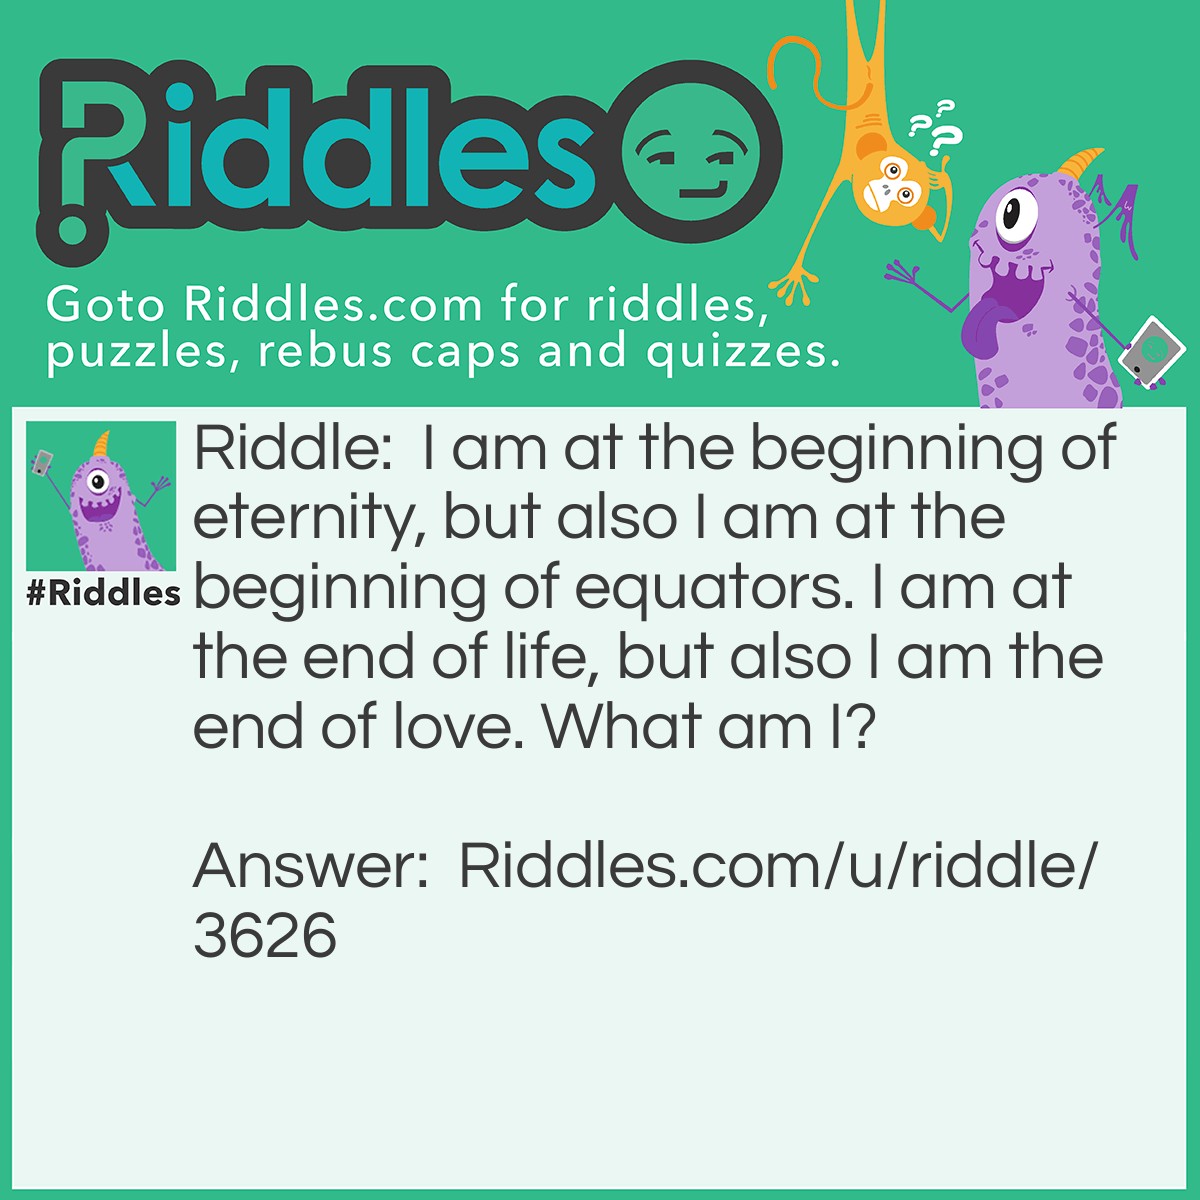 Riddle: I am at the beginning of eternity, but also I am at the beginning of equators. I am at the end of life, but also I am the end of love. What am I? Answer: The letter E